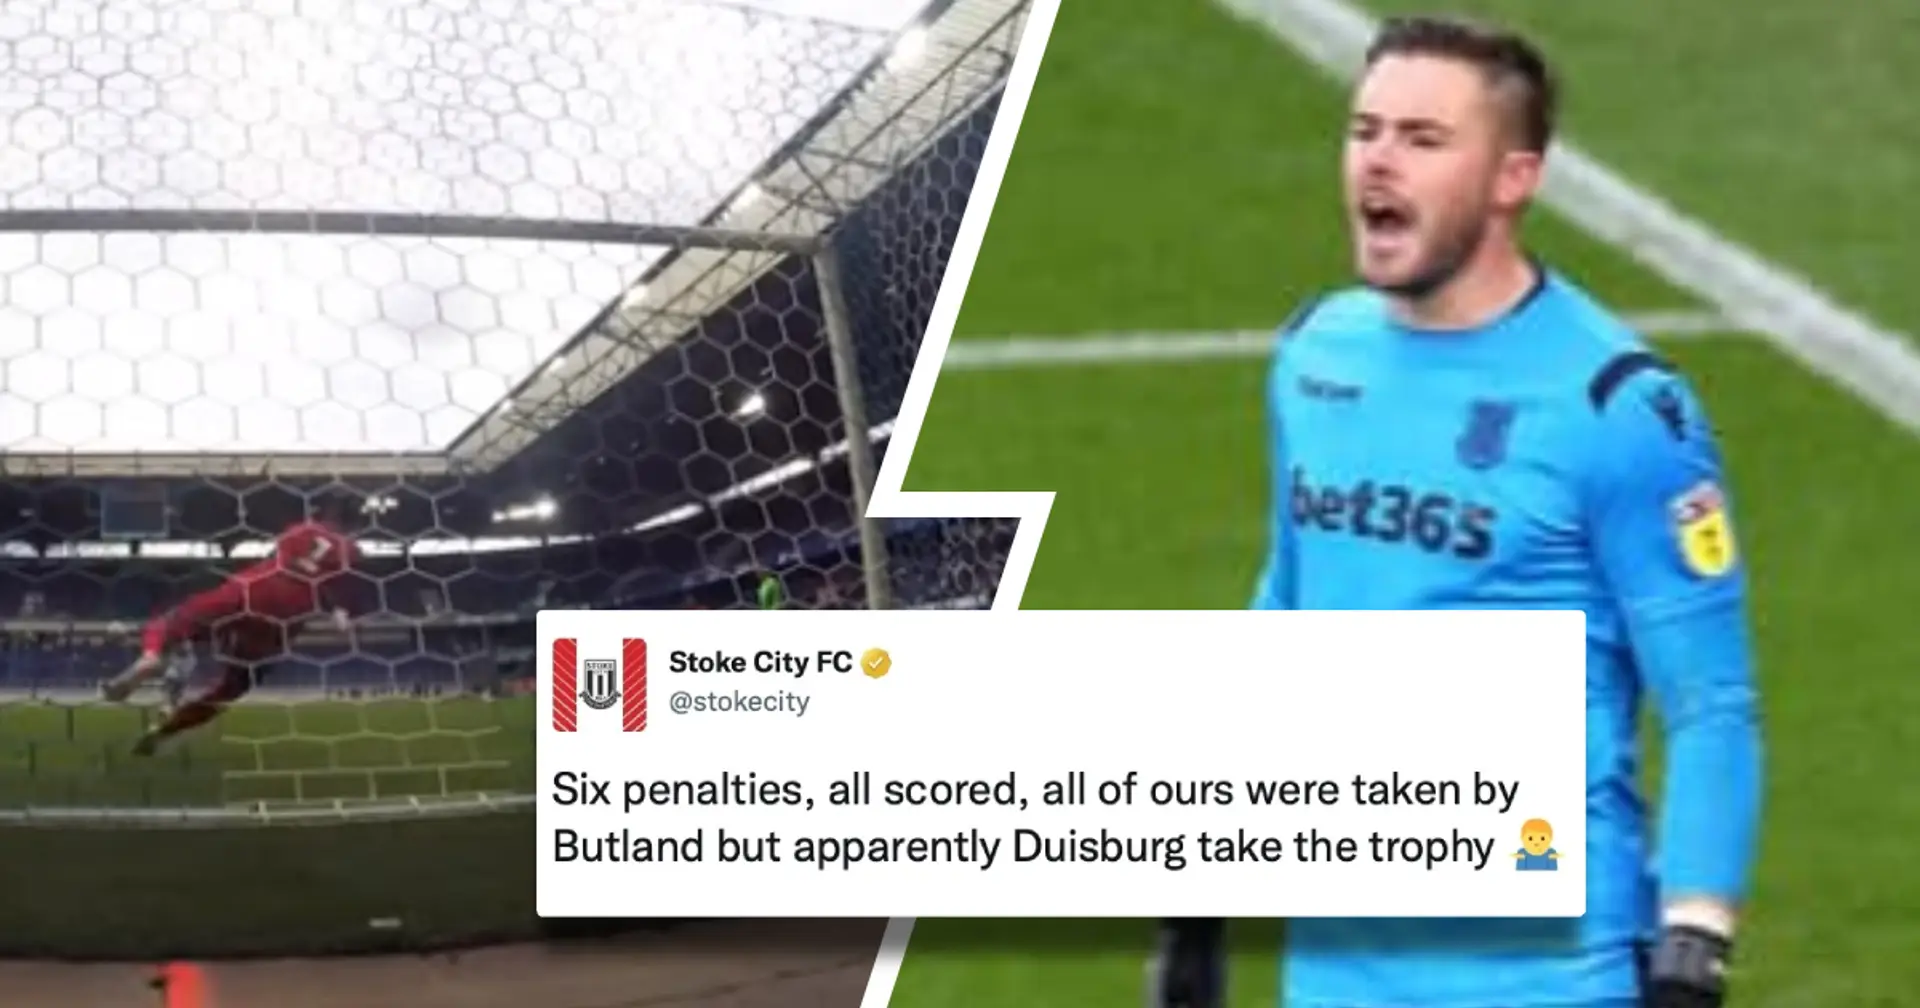 Throwback: When Jack Butland took all of Stoke City's penalties in weirdest shootout ever